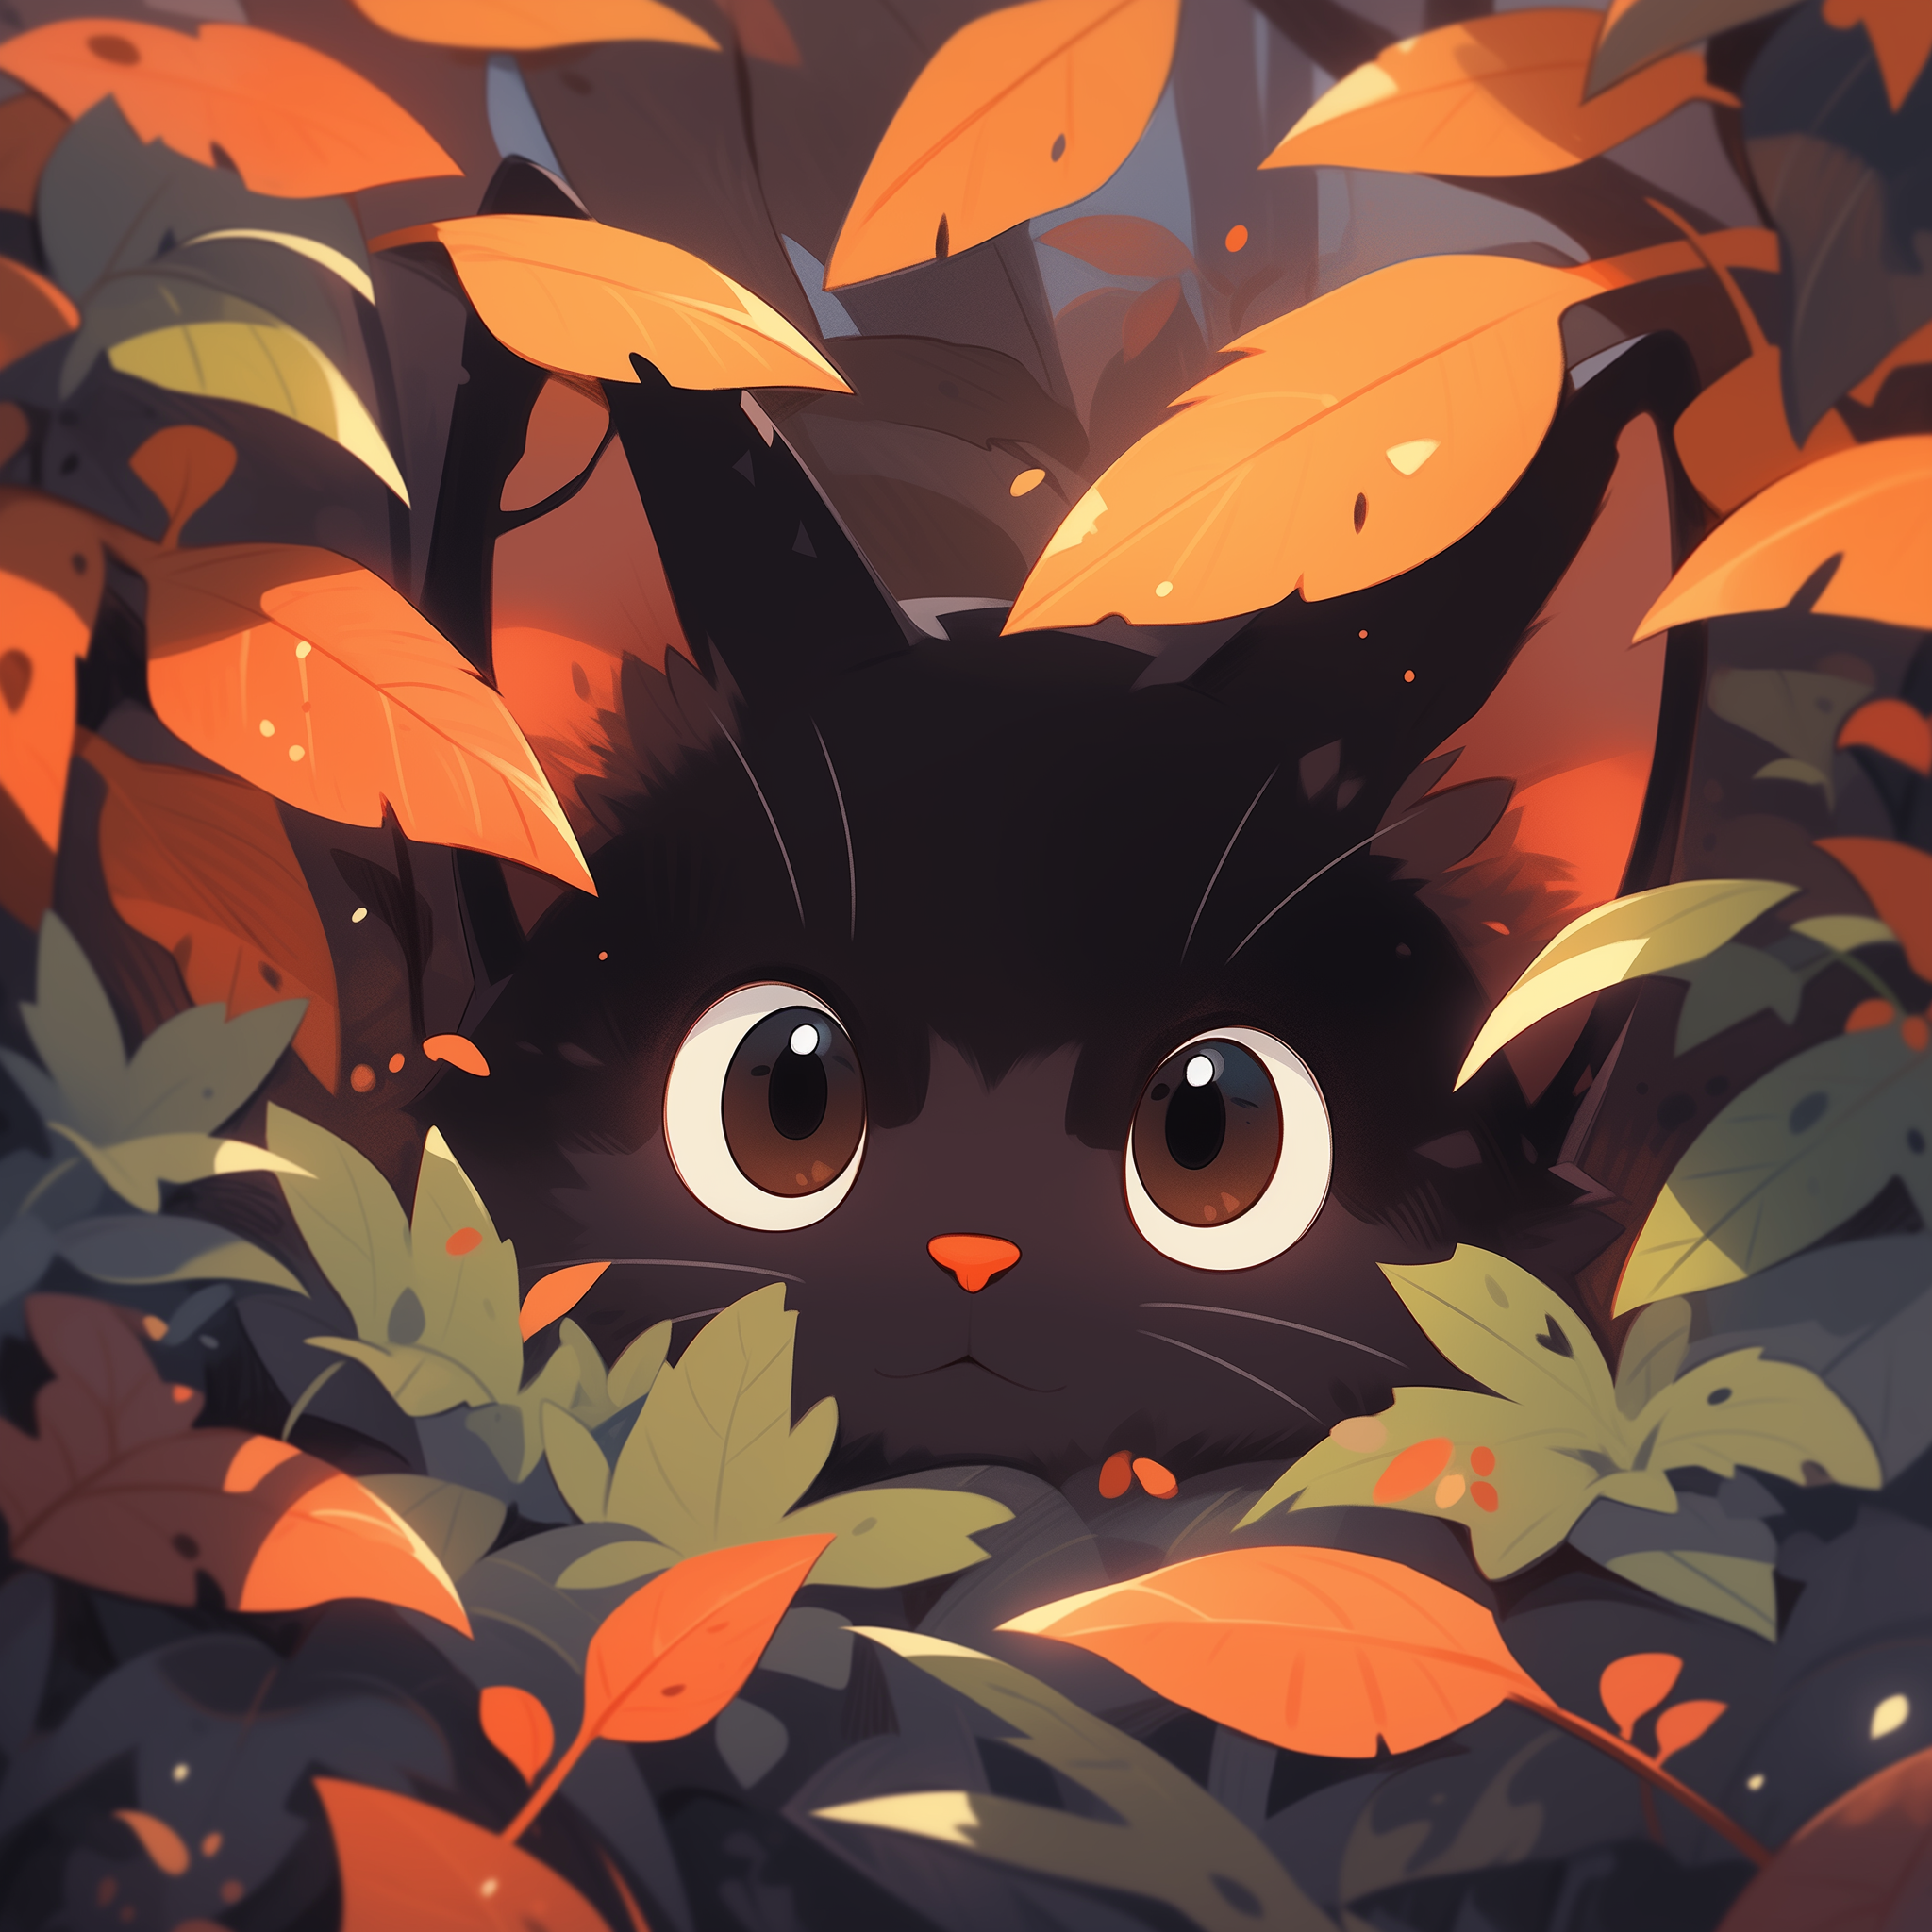 Avatar of a cute black cat peering through autumn leaves, ideal for a profile picture.